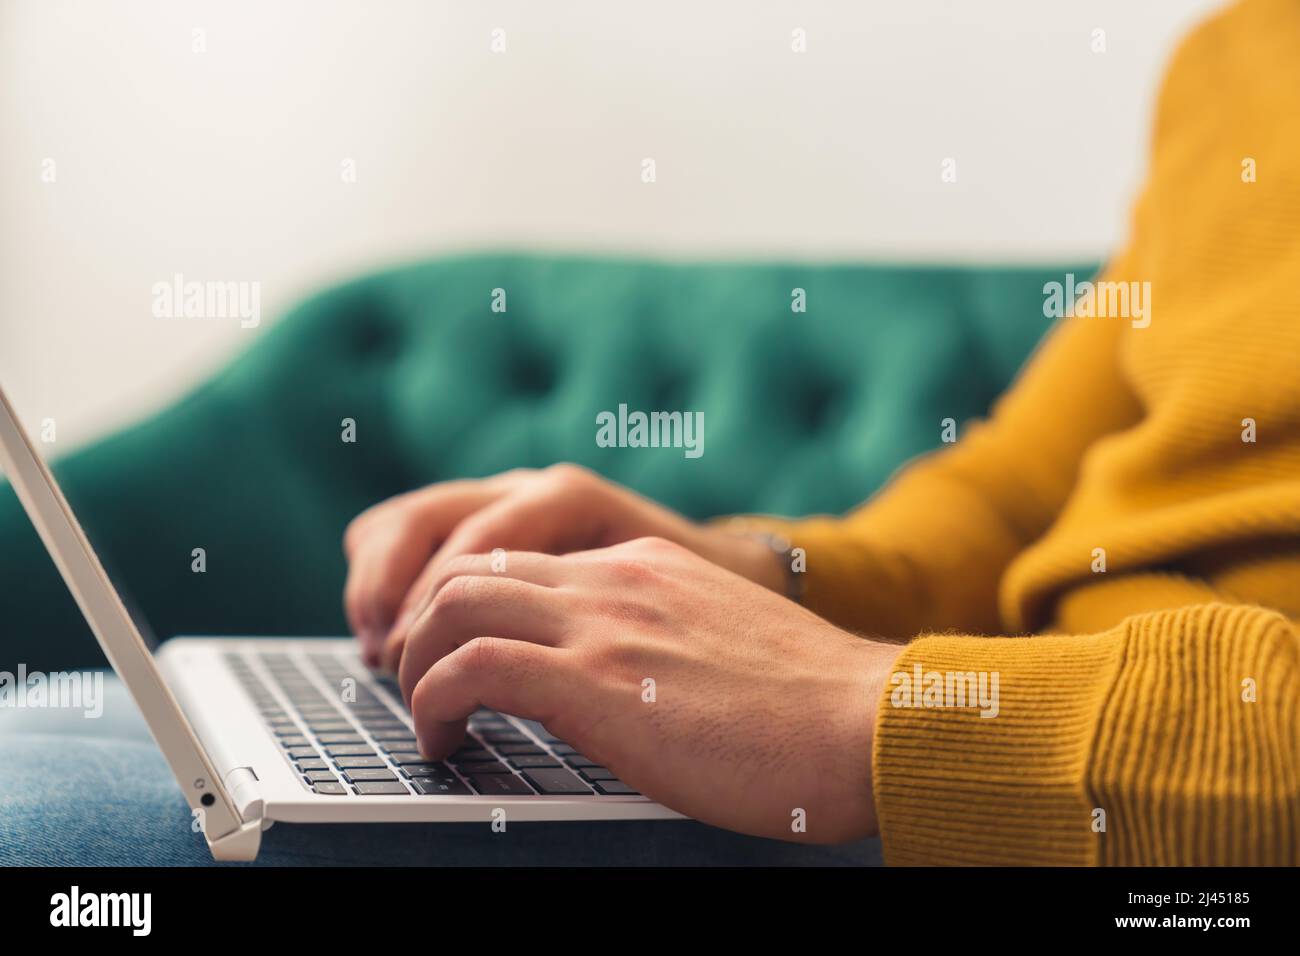 Closeup of Caucasian man working with a laptop on the couch, hands and keyboard visible remote job concept . High quality photo Stock Photo